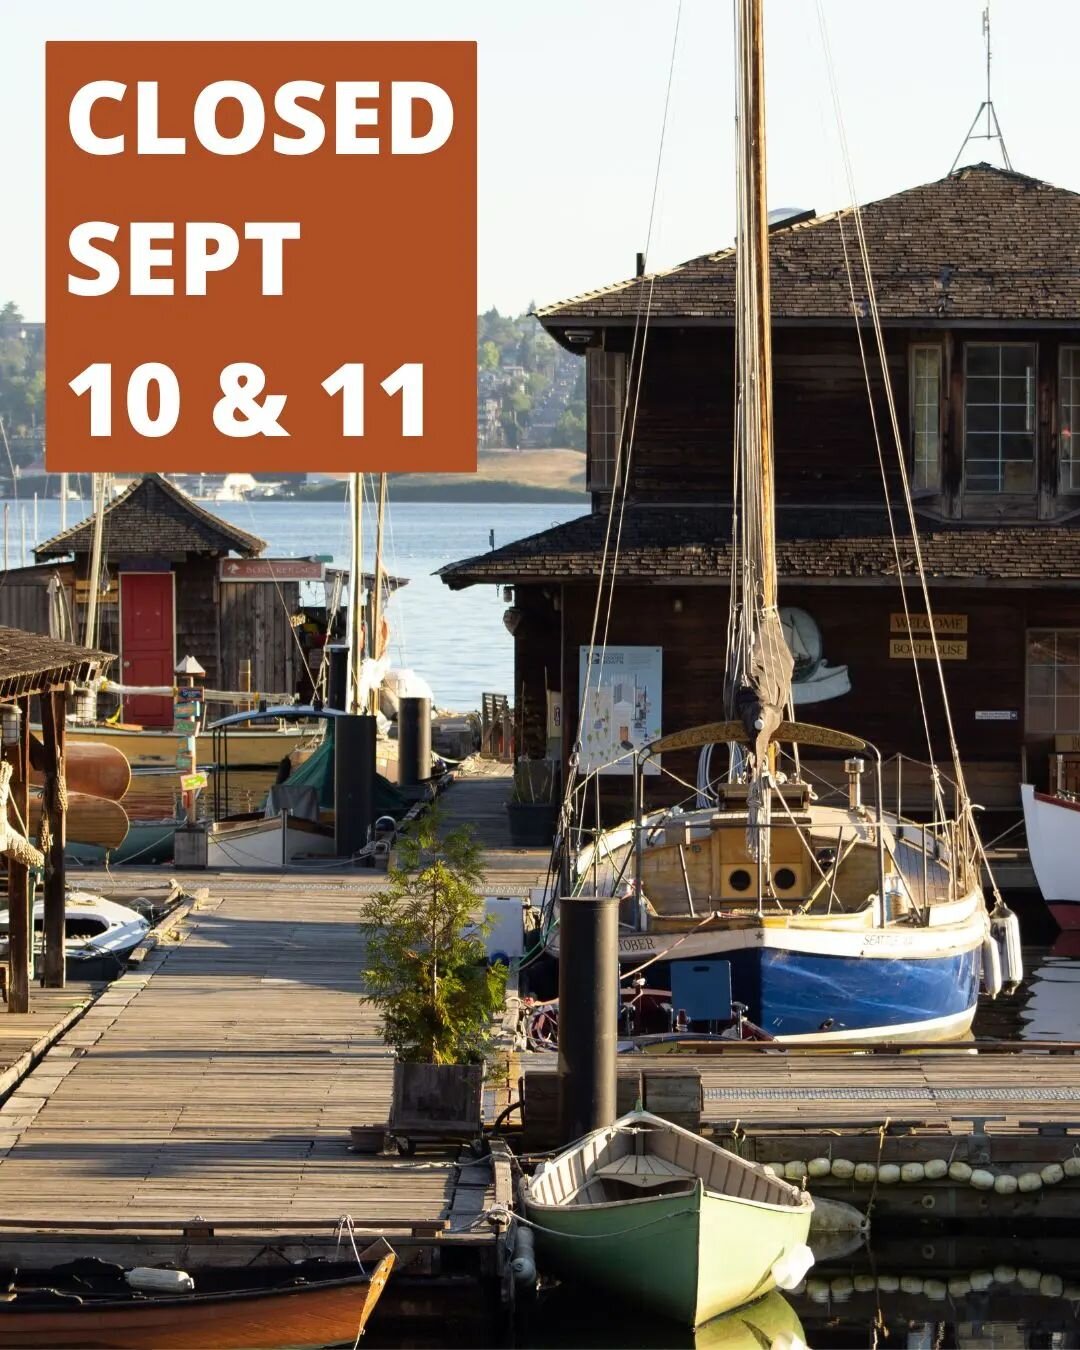 We'll be closed this weekend, September 10 and 11 (but remain open Friday the 9th) to show boats at the Port Townsend Wooden Boat Festival! We're excited to bring up Halcyon, Big Wave Dave, and Puffin, who will be providing public rides. See you ther